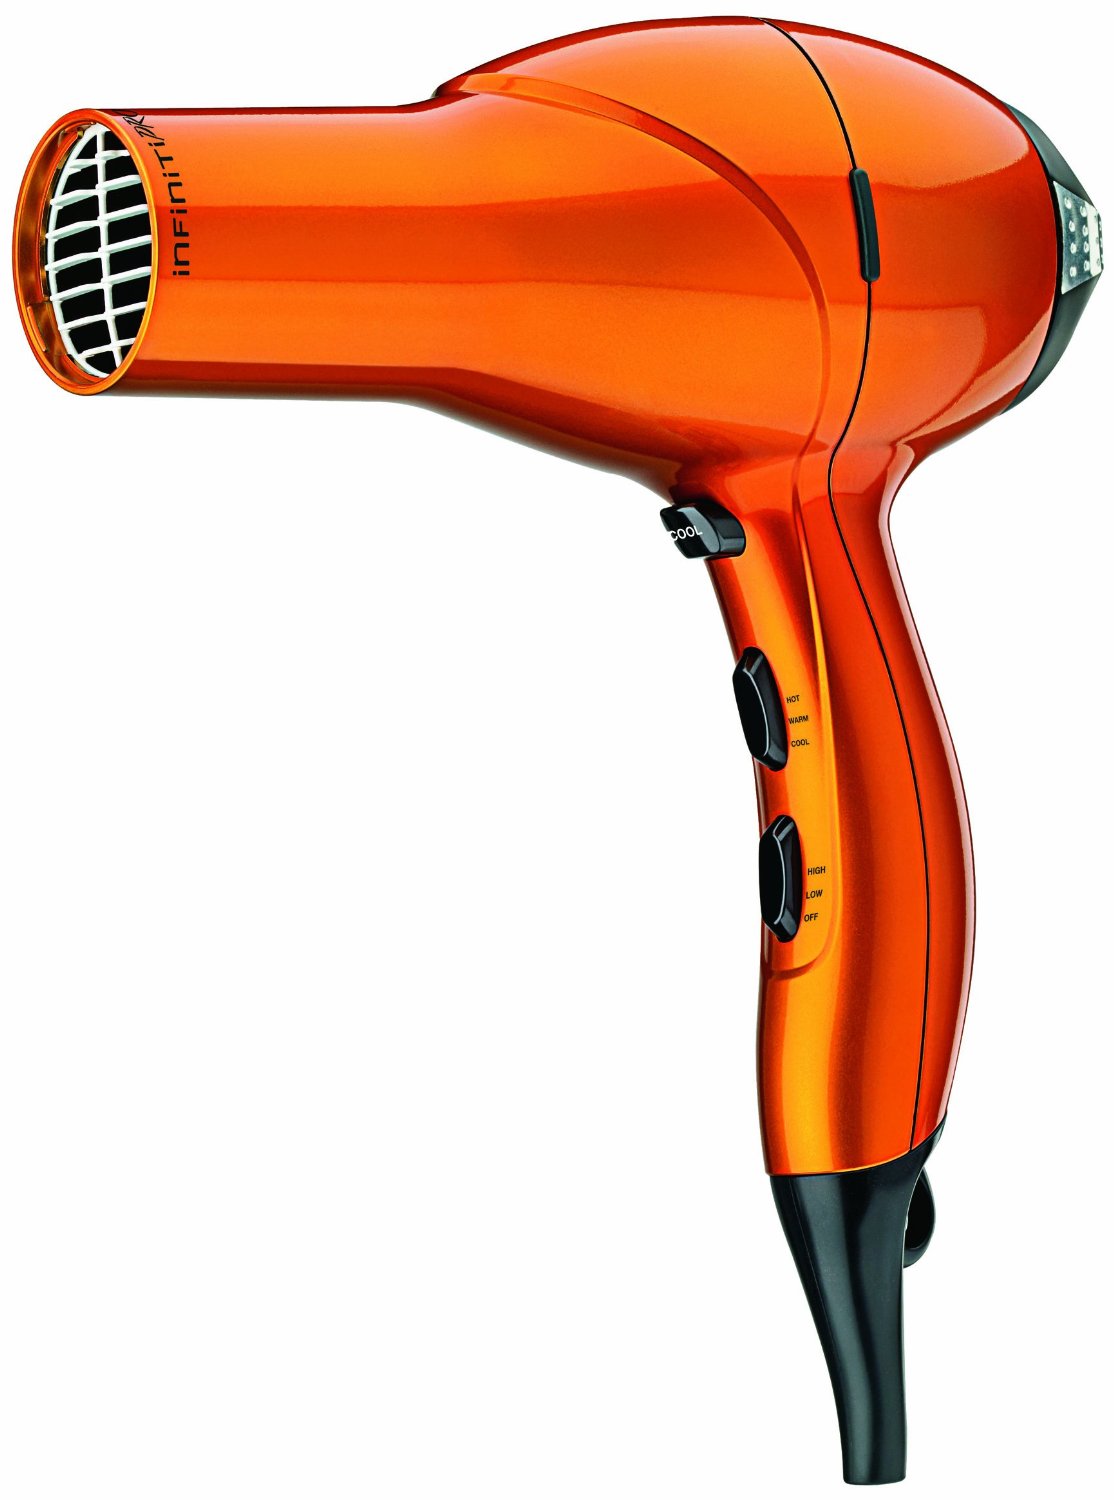 hair dryer review | Mud and Joy